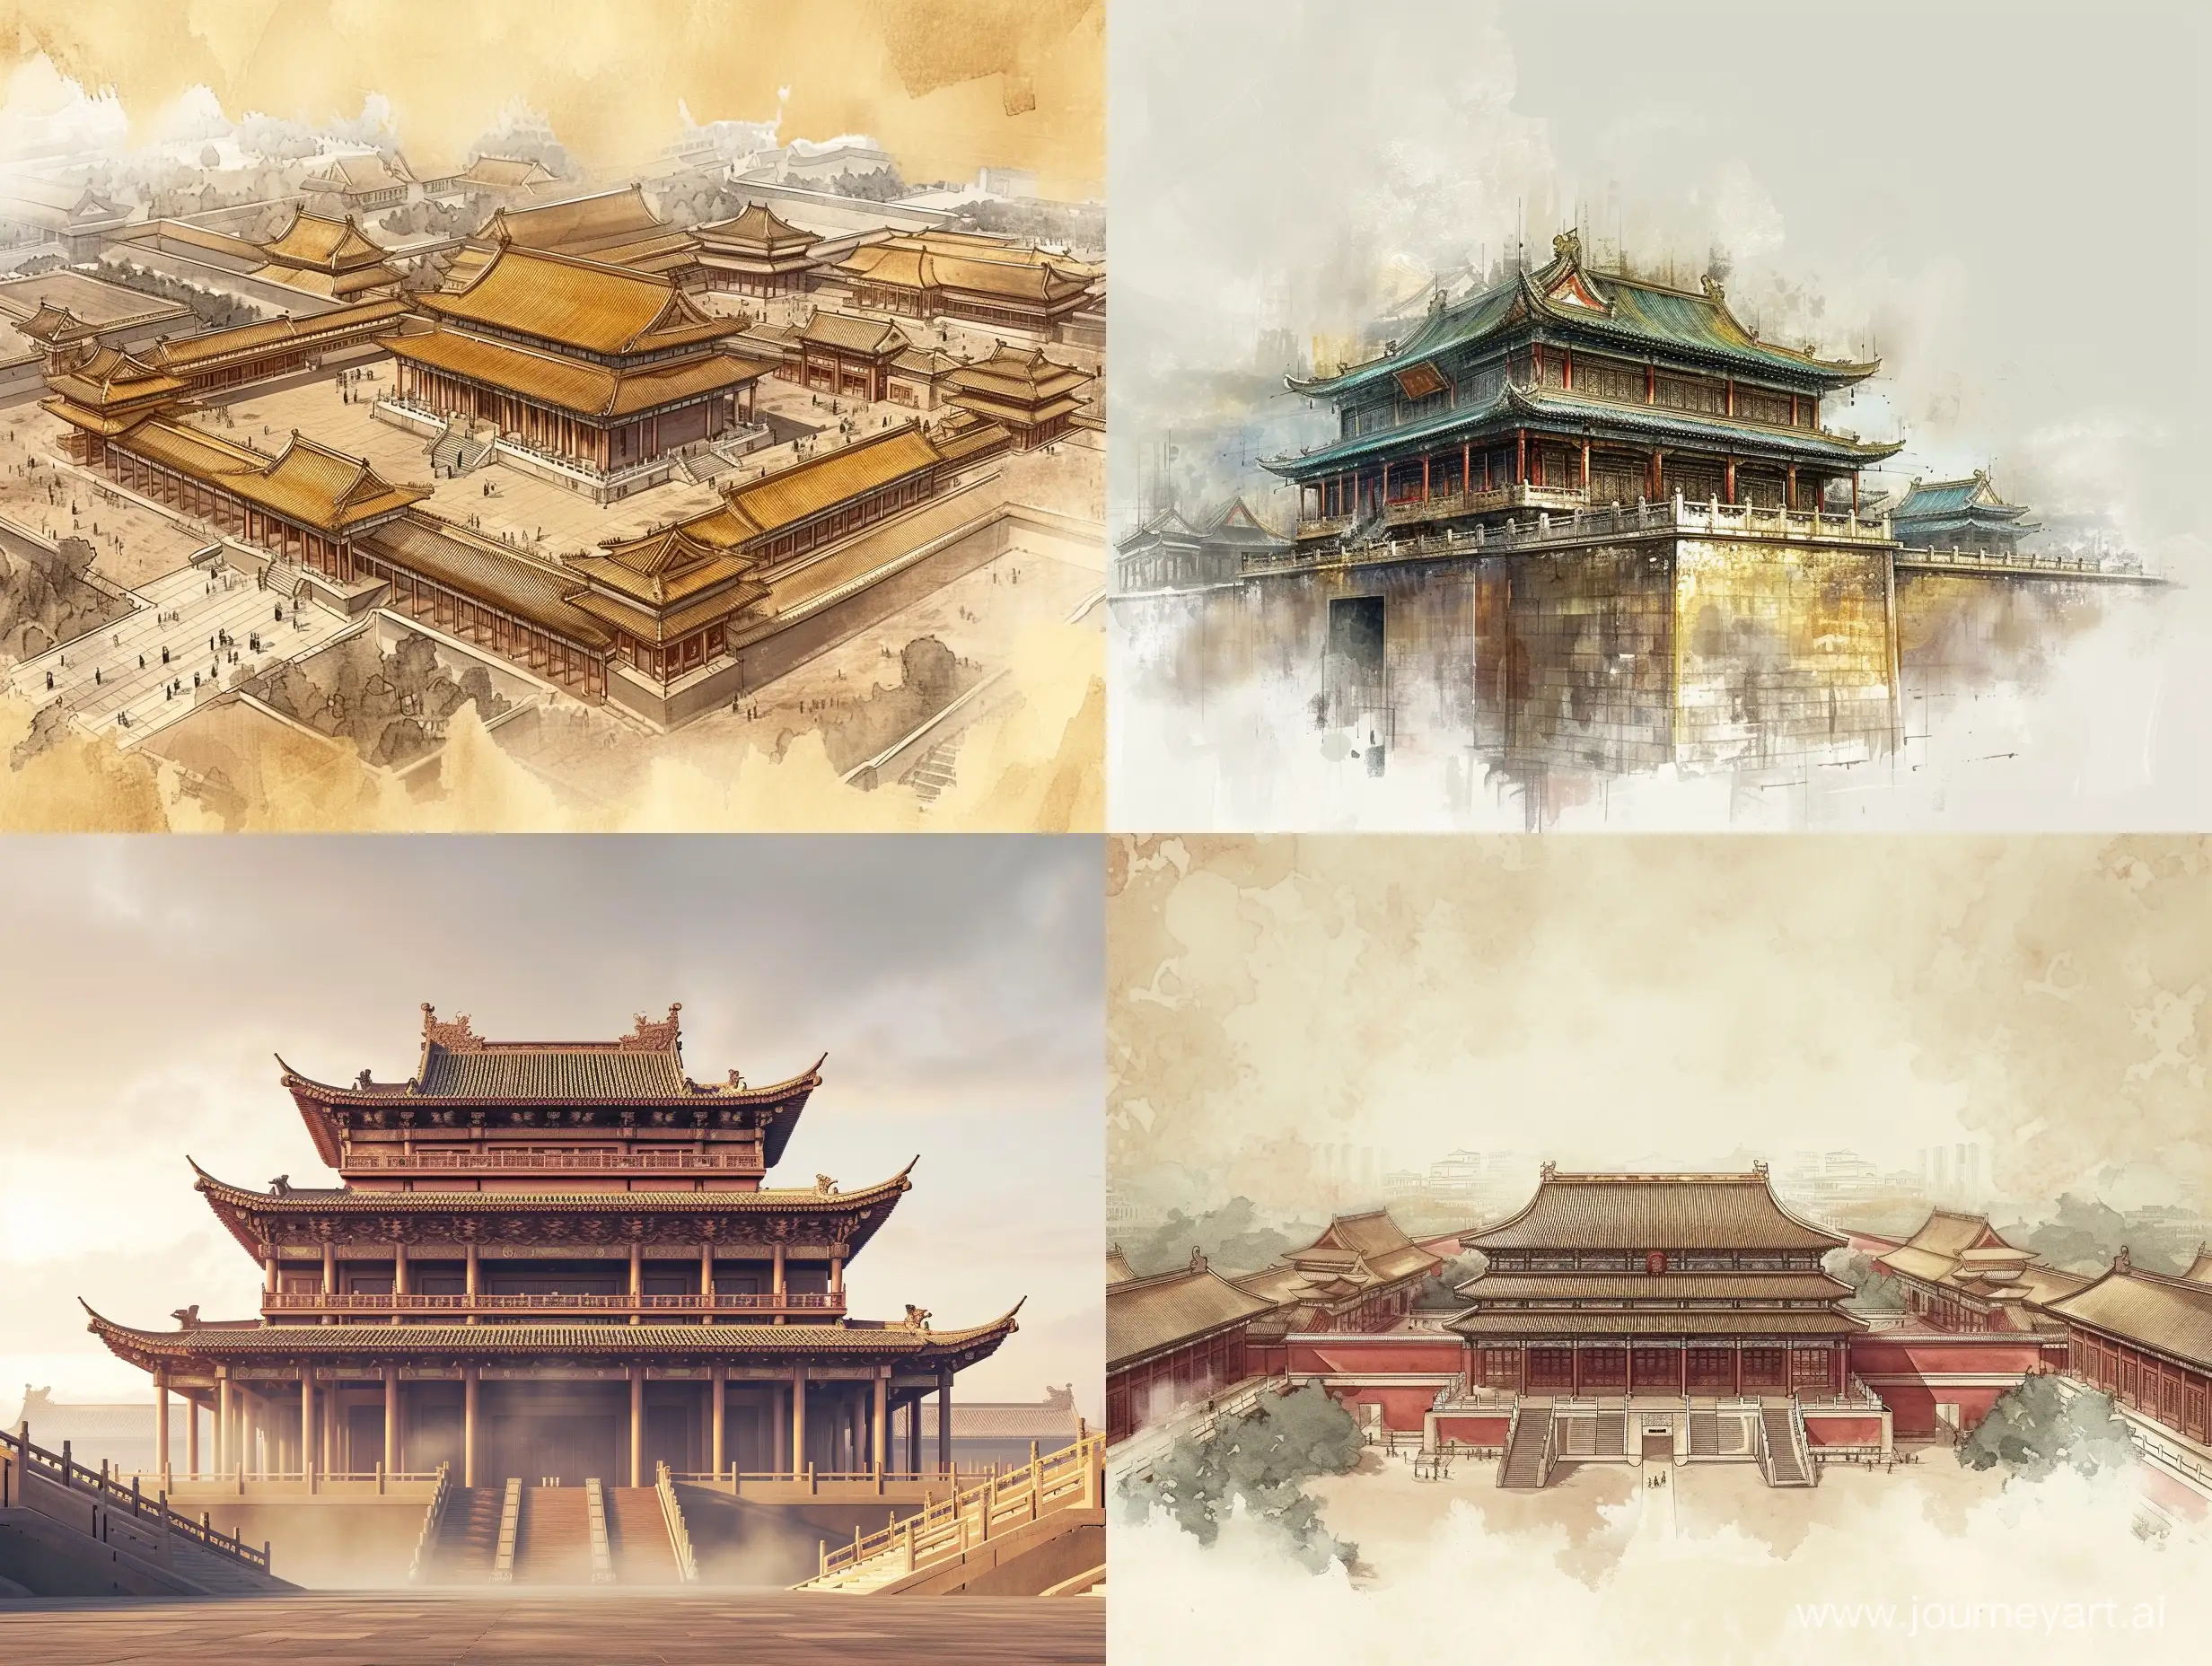 Majestic-Han-Dynasty-Style-Palace-in-HighDefinition-Ink-Wash-Elegance